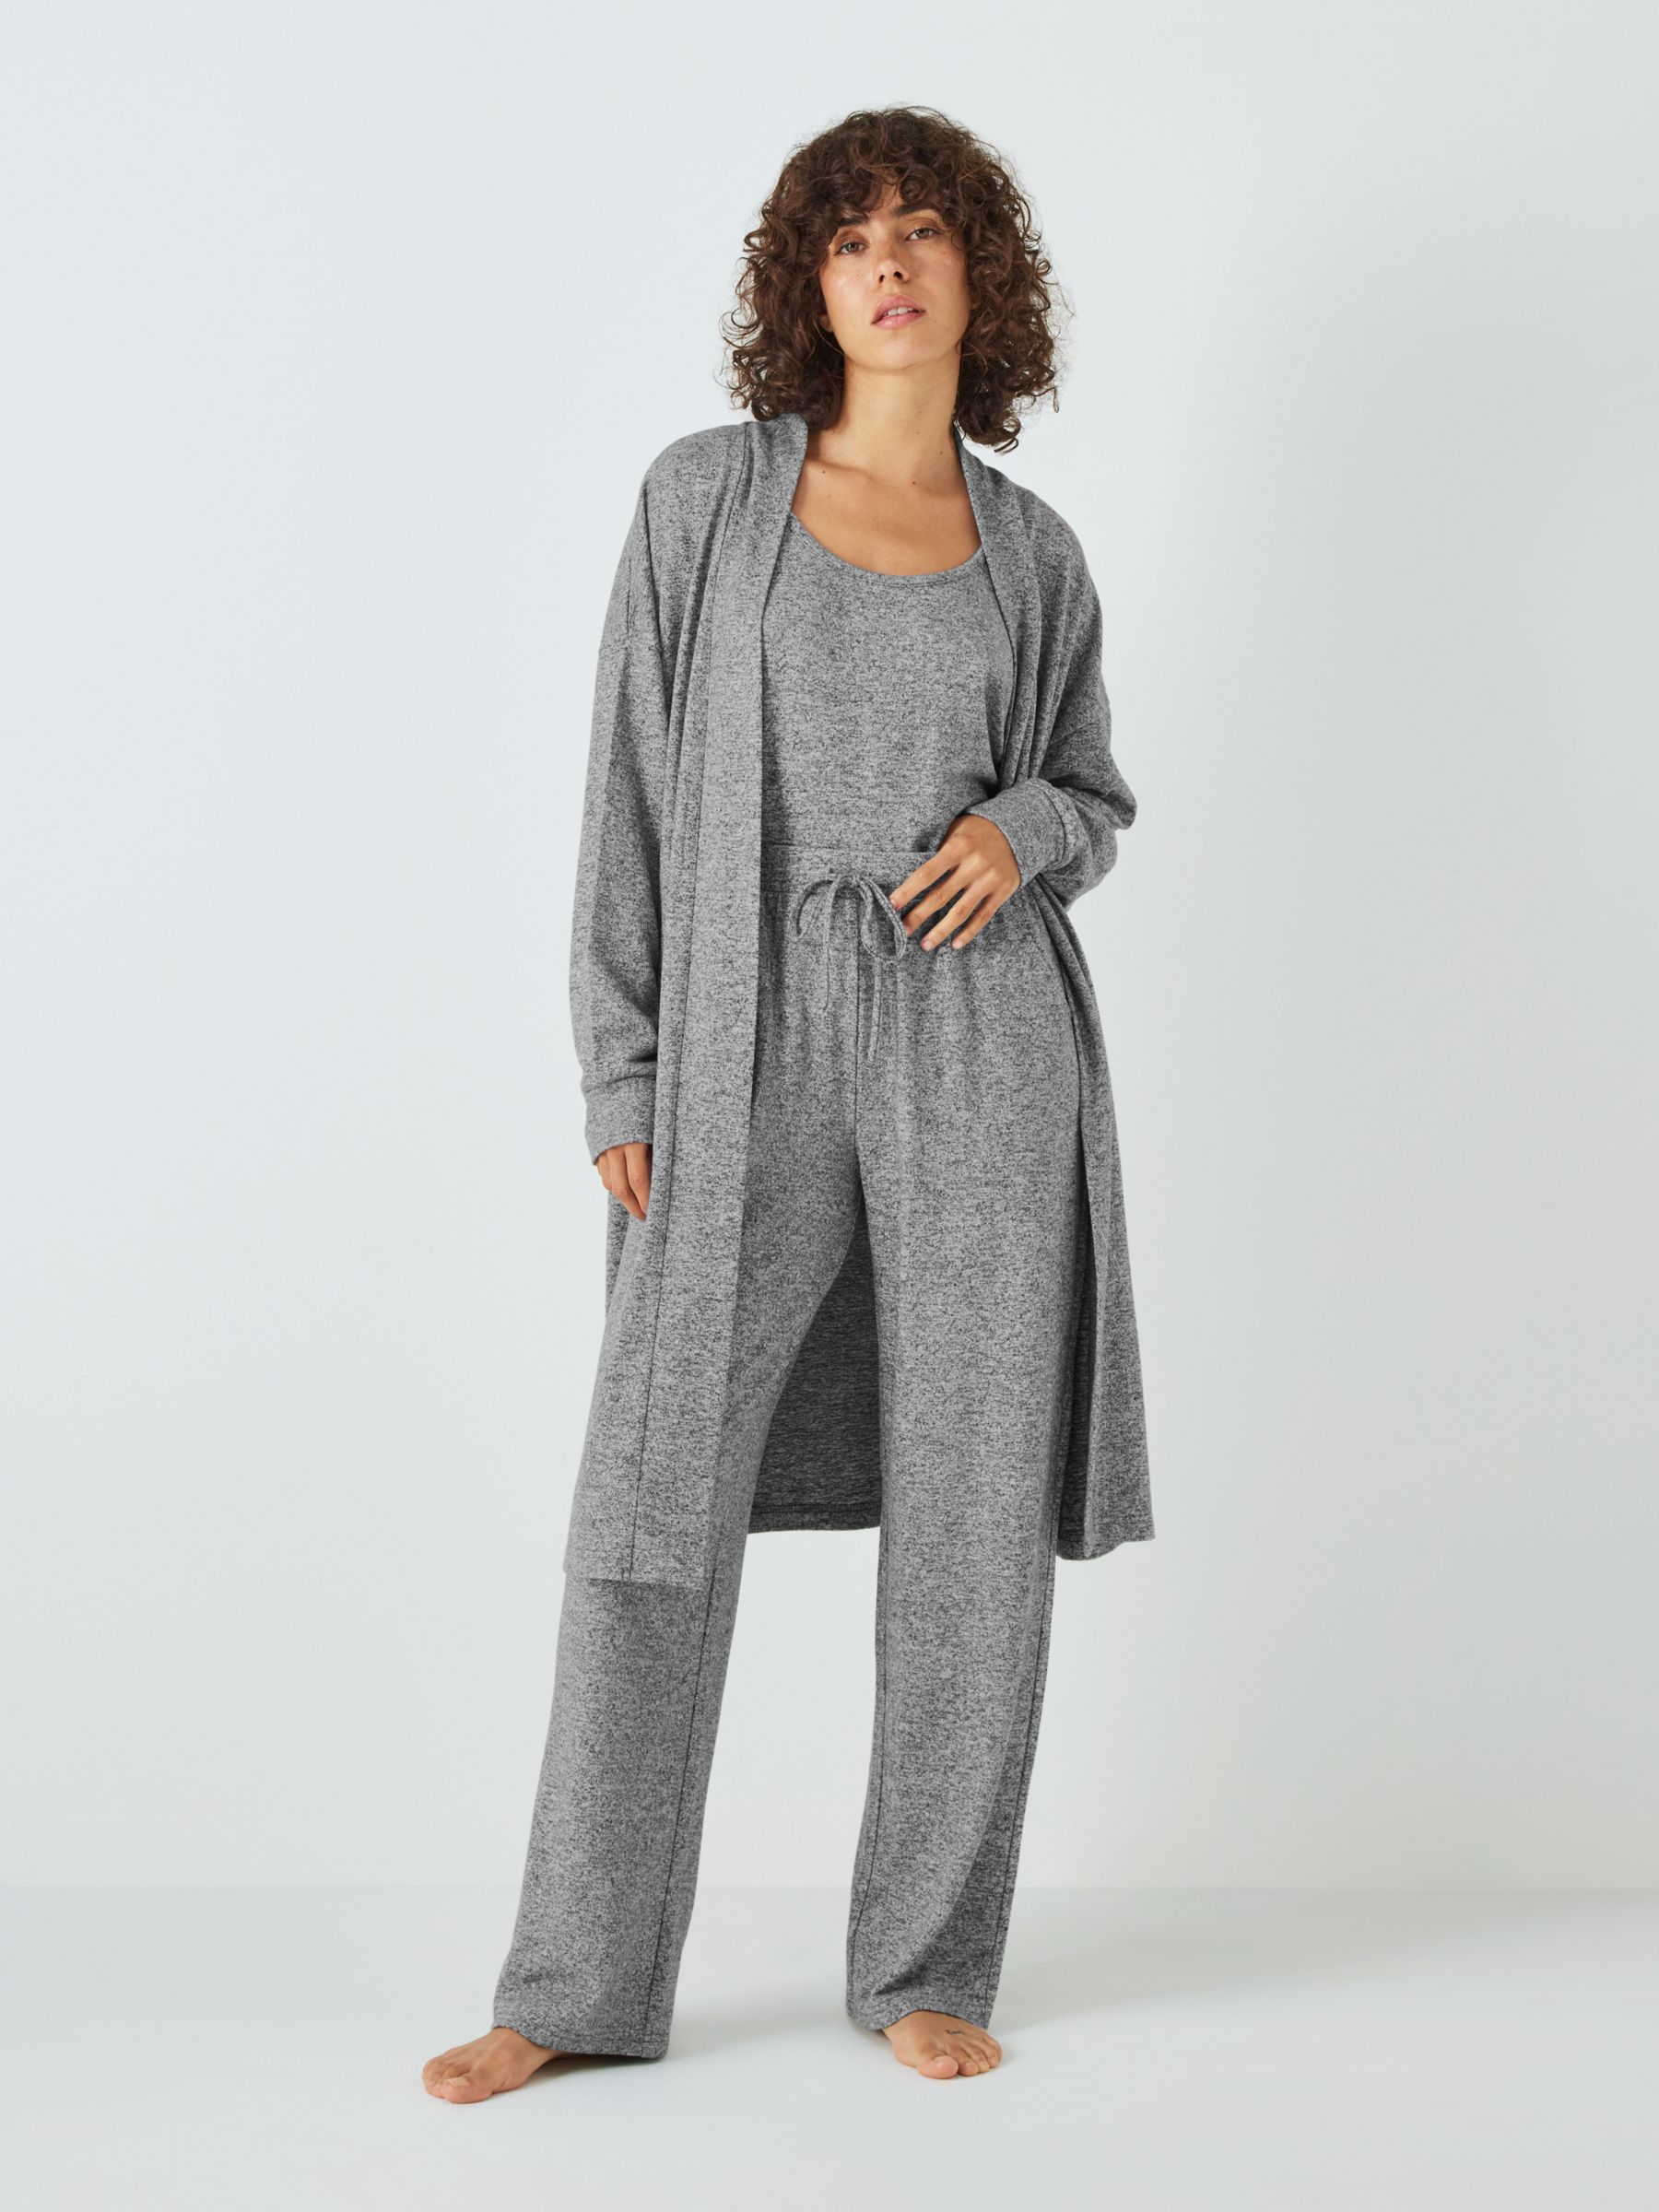 Marks and Spencer Women's Loungewear Cozy Knit Rib Cuffed Pant, Grey Mix,  12 Long at  Women's Clothing store